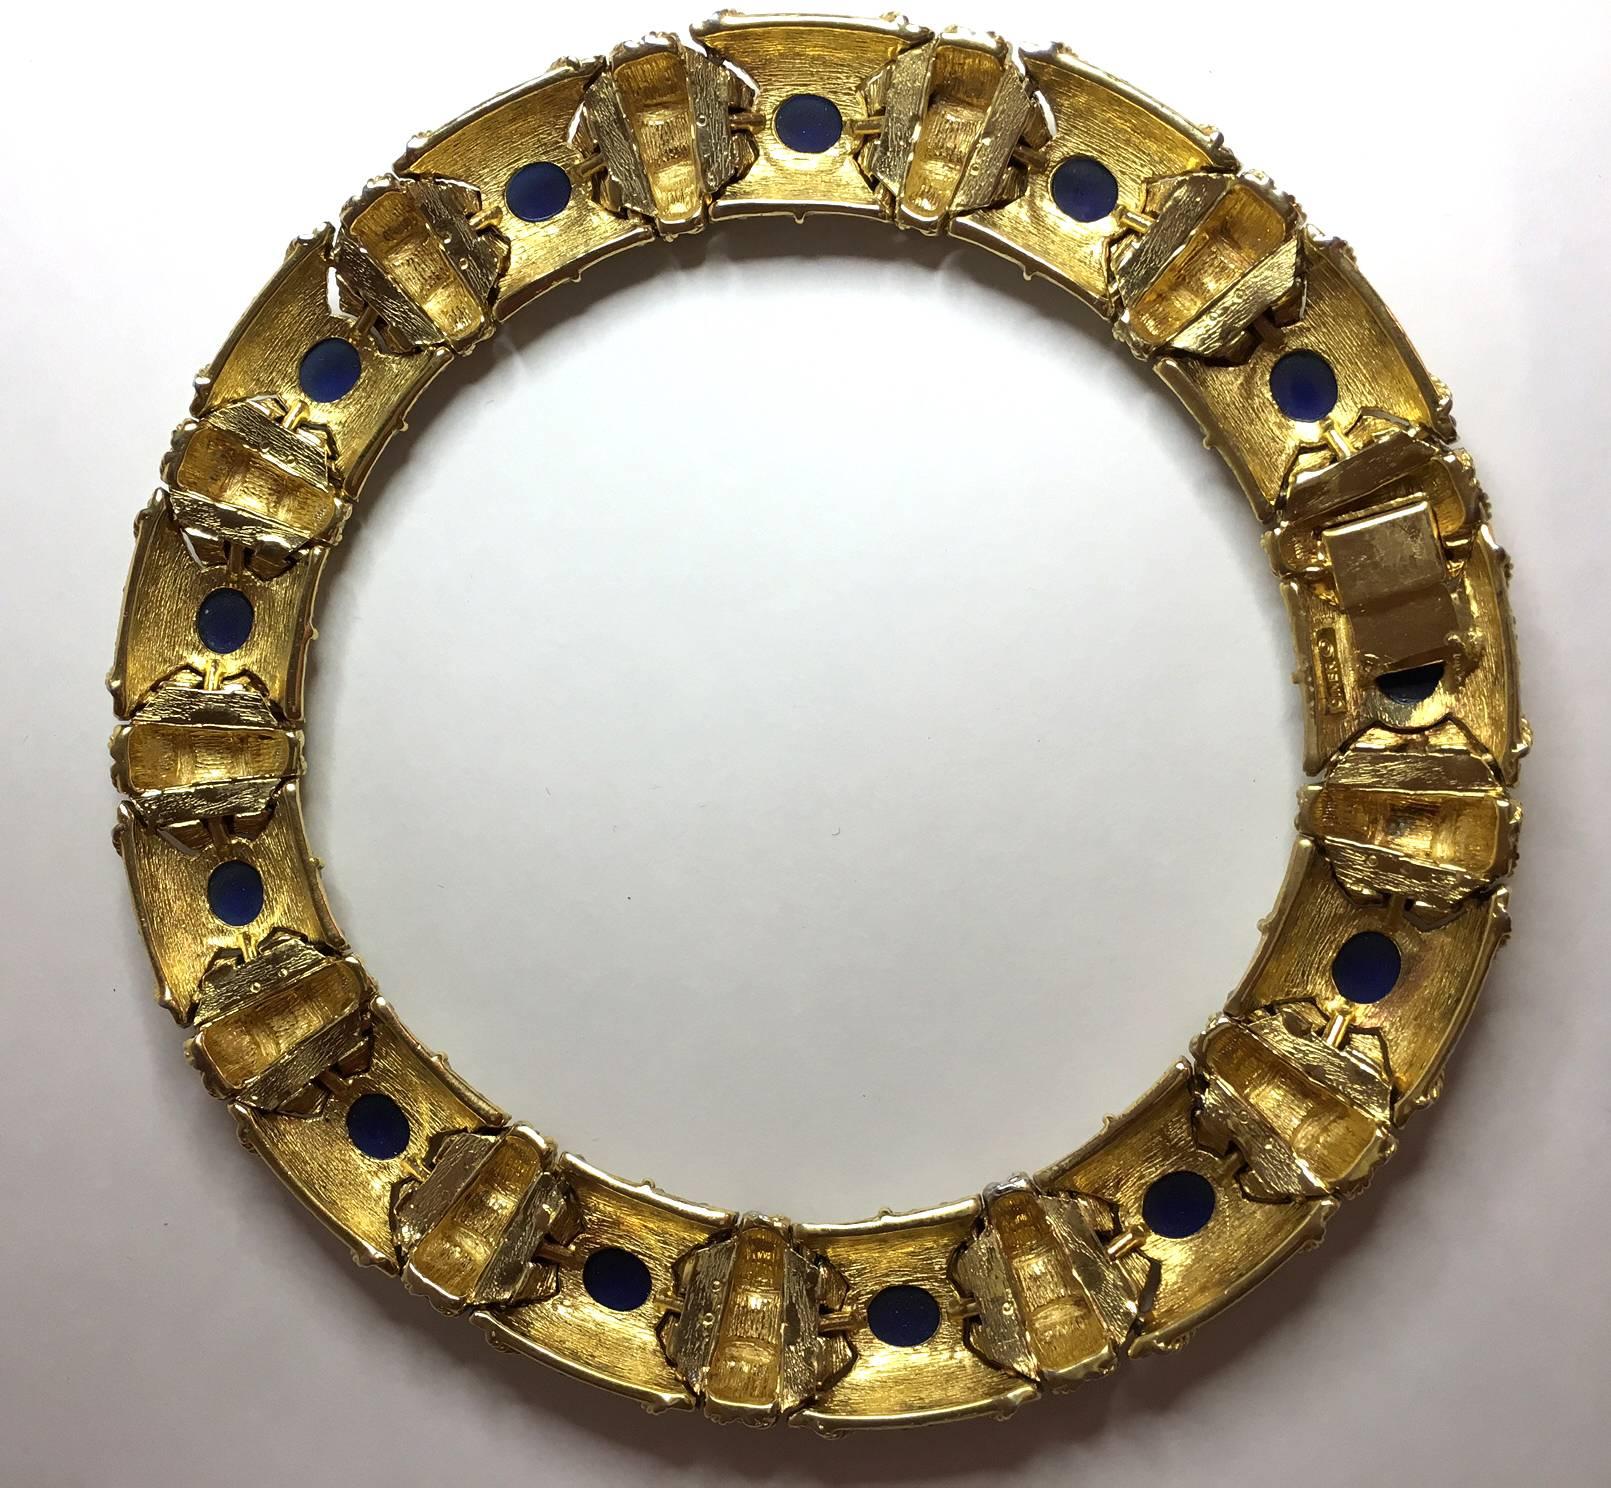 Fine costume jewelry by Ciner is as lovely and appears quite genuine in comparison to many other makers or manufacturers. This amazing perfectly circular semi-rigid necklace combines gold tone settings with amazing full paved surfaces and